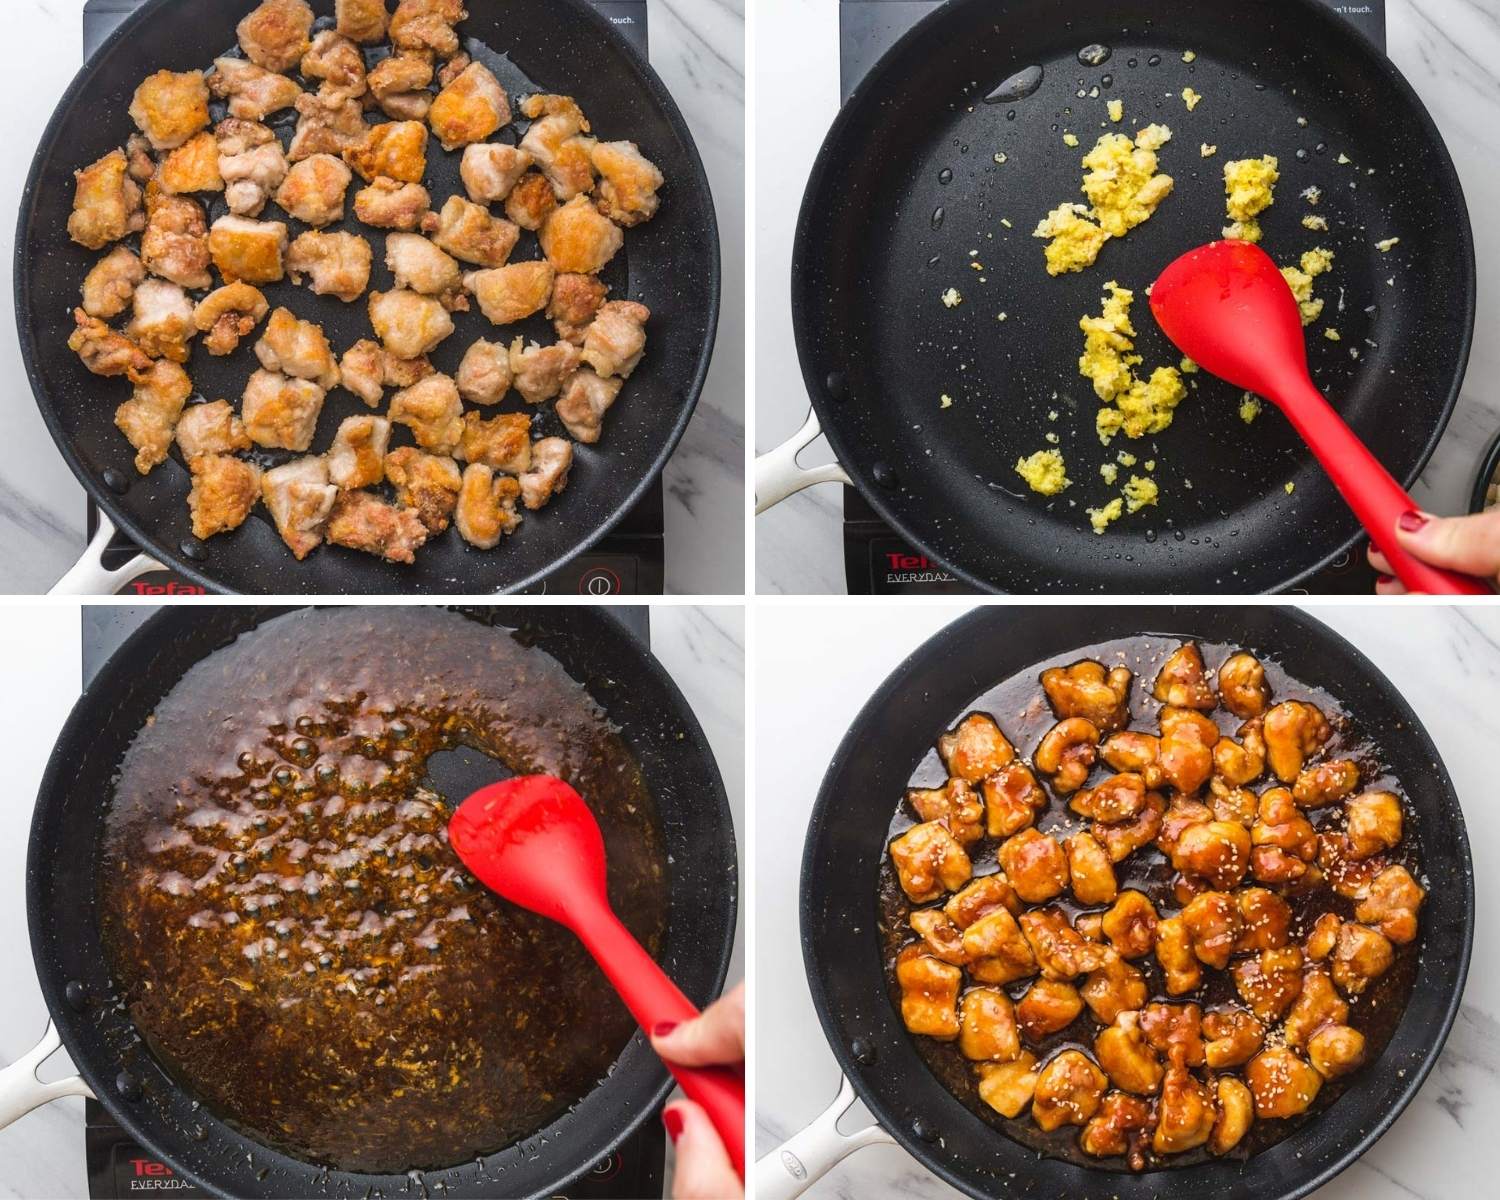 photographs showing how to make general tso's sauce and chicken in a skillet